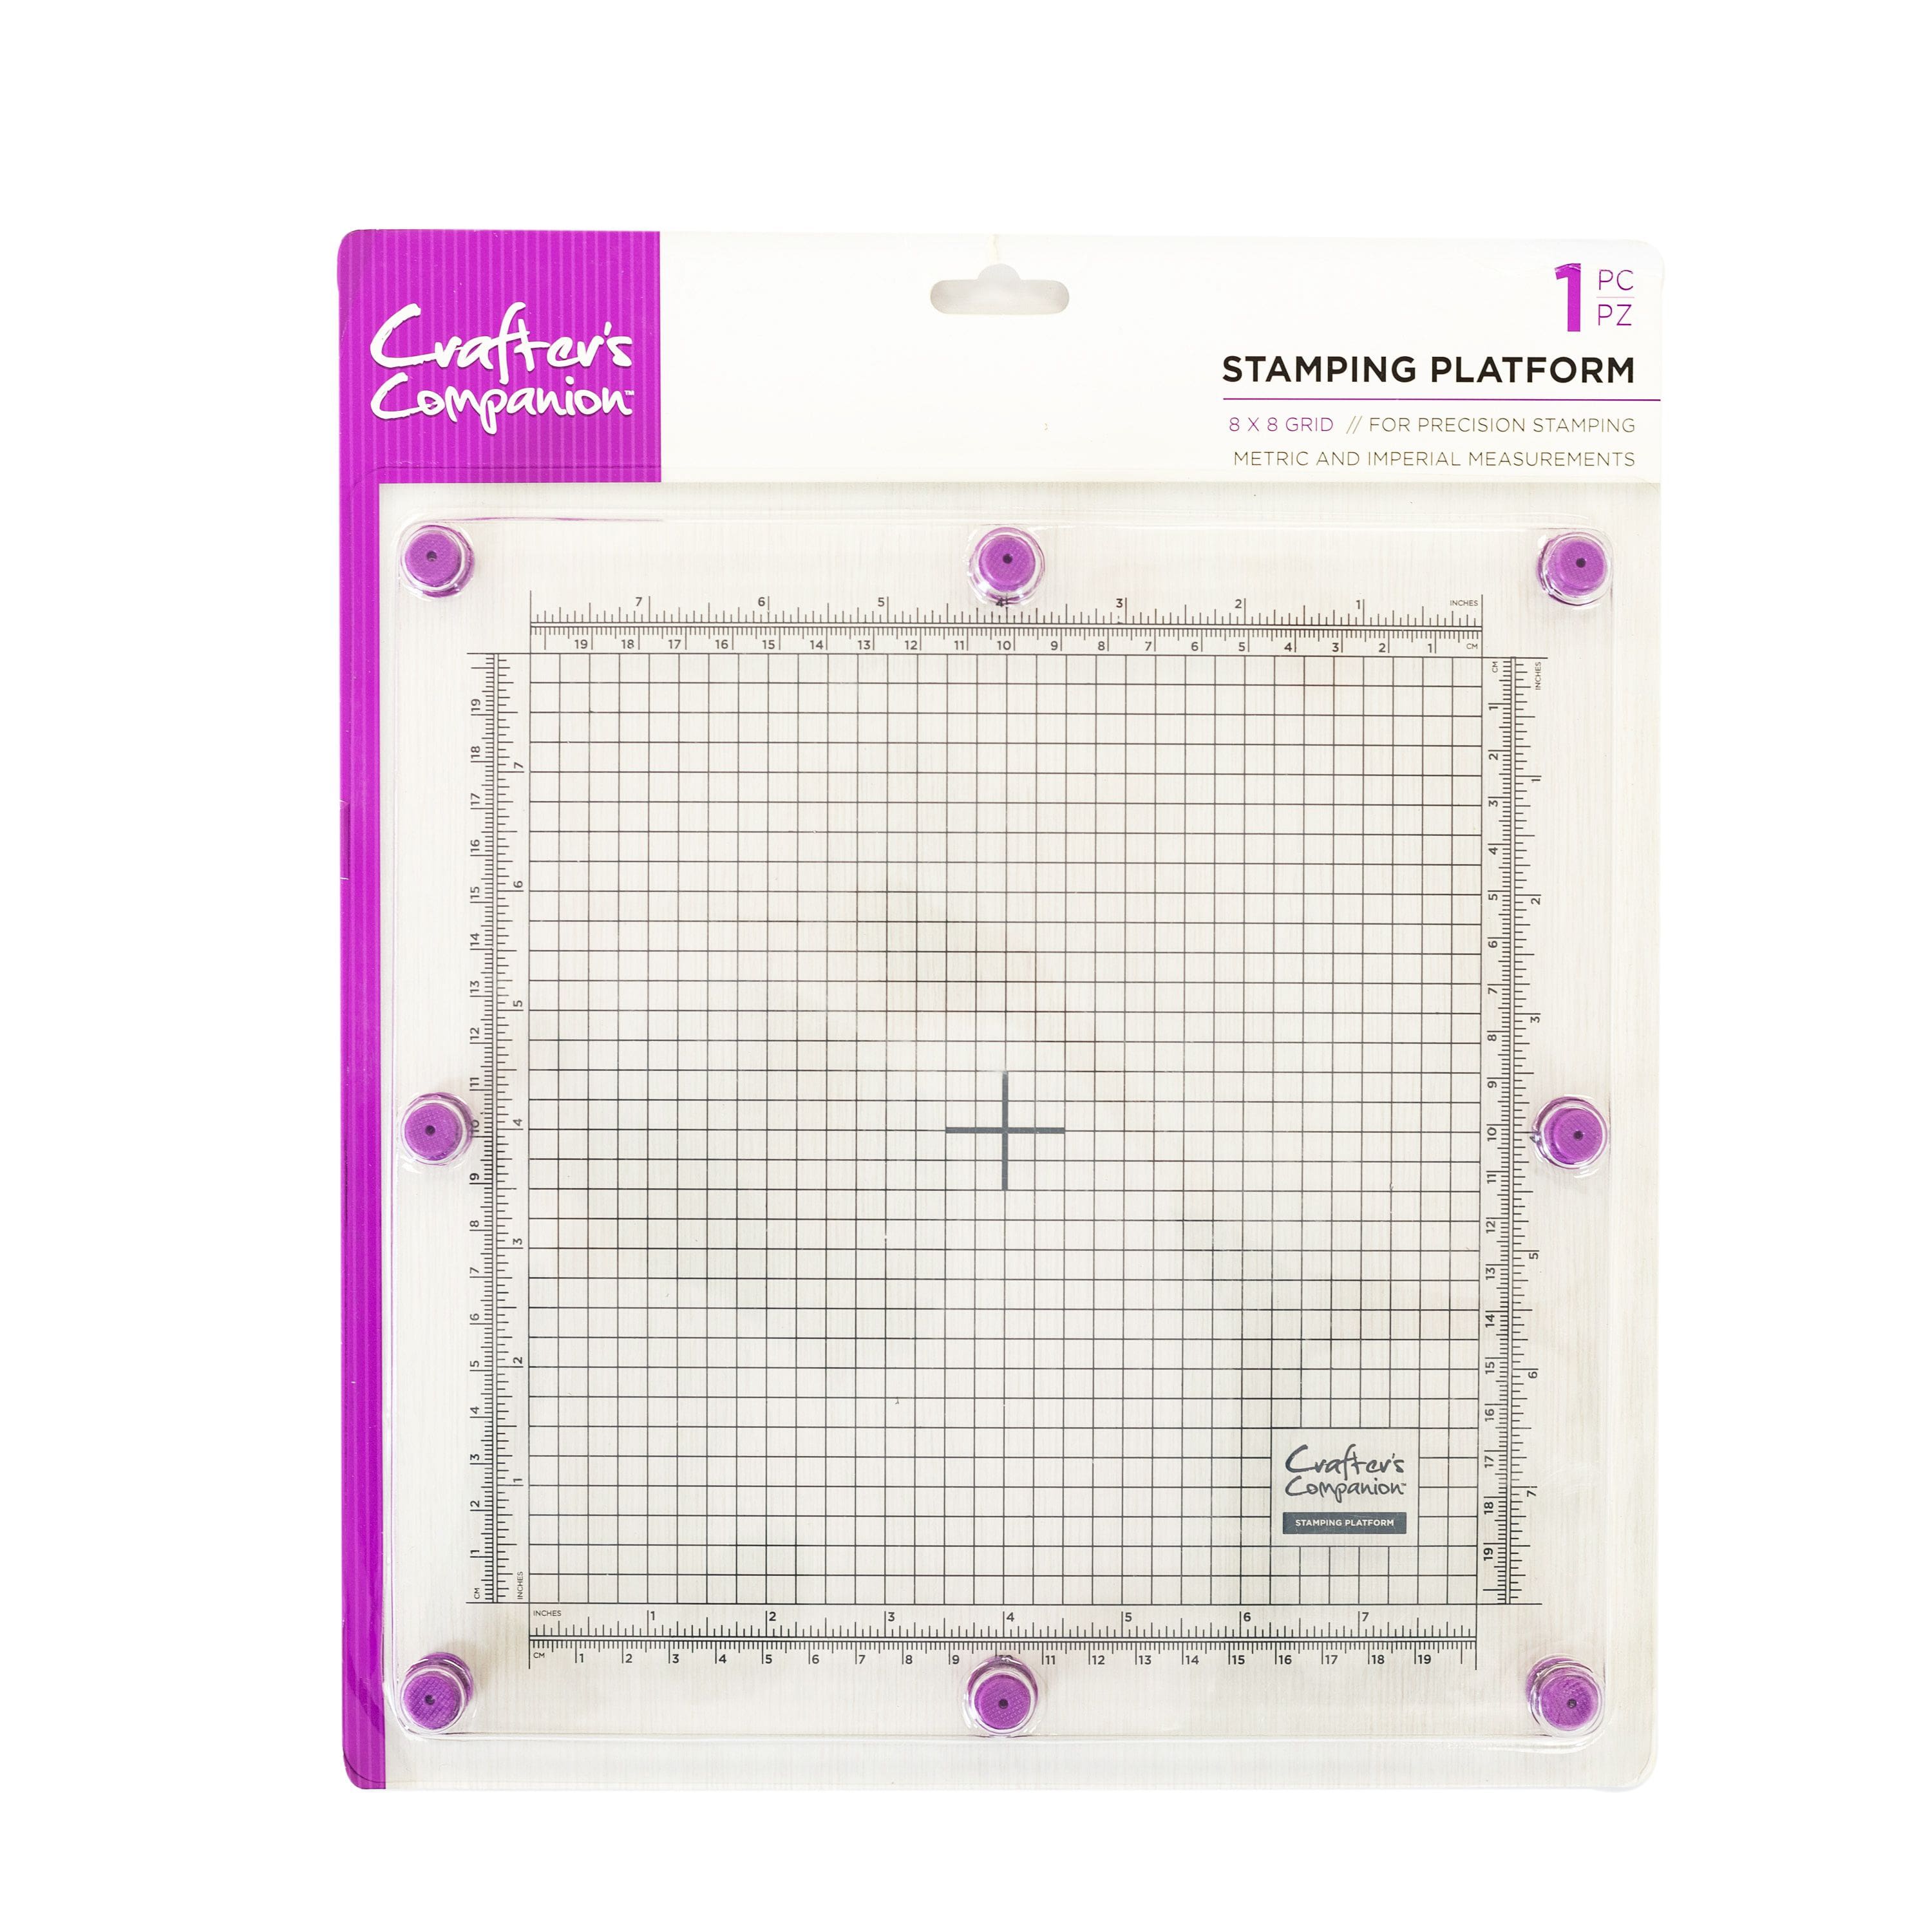 Crafter's Companion - Stamping Platform with Magnetic Base 8 x 8